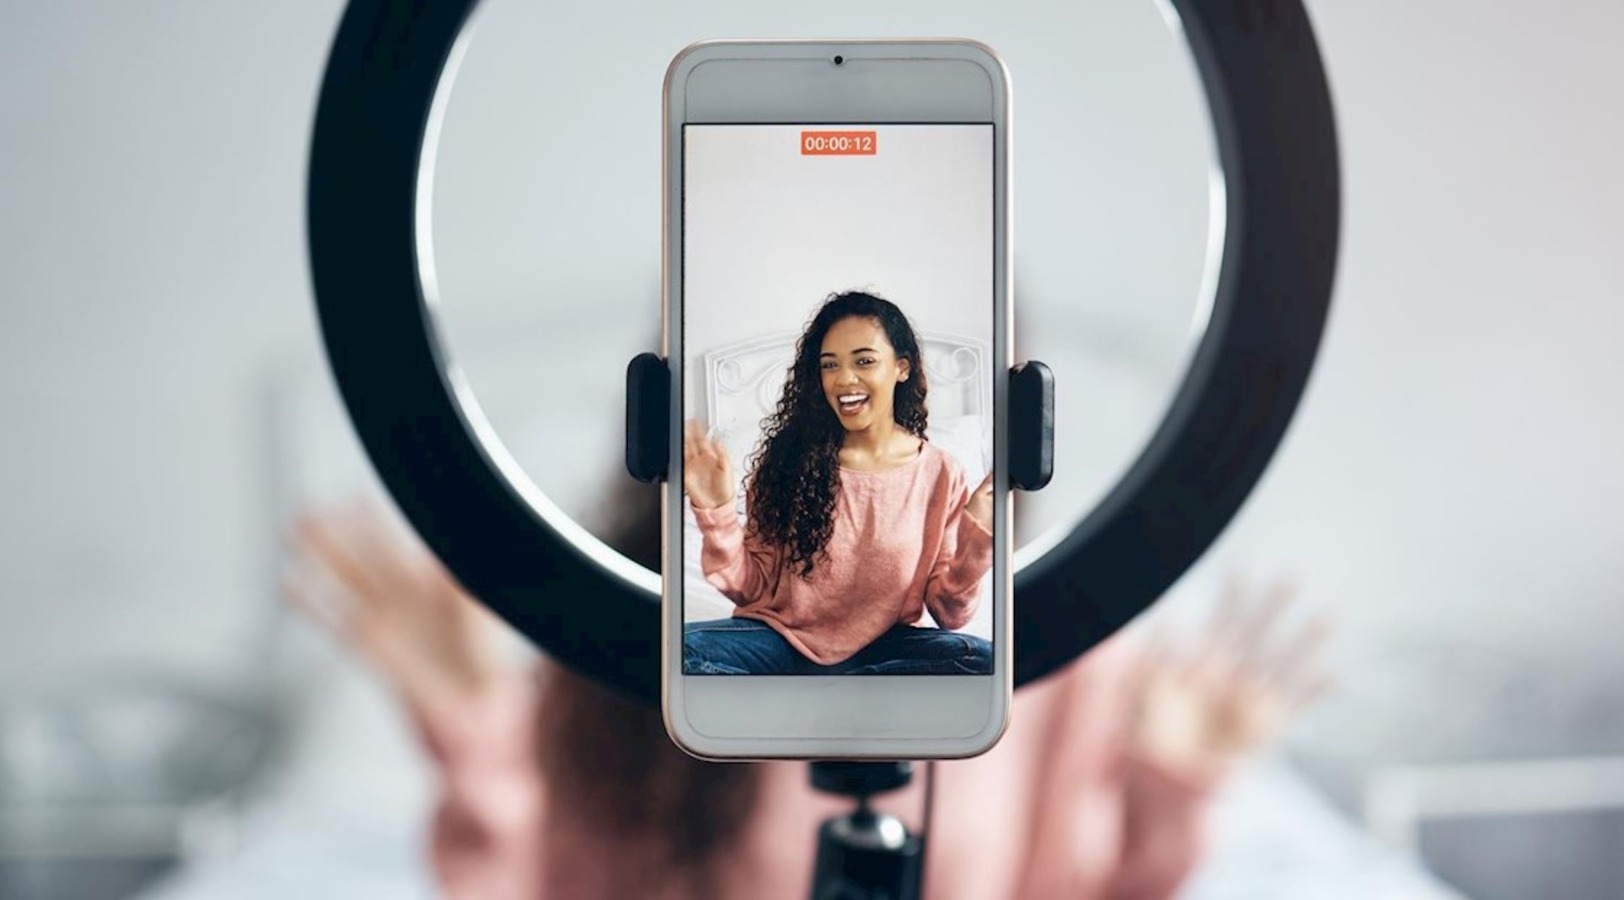 Influencer marketing is the best way to generate sales, says new study